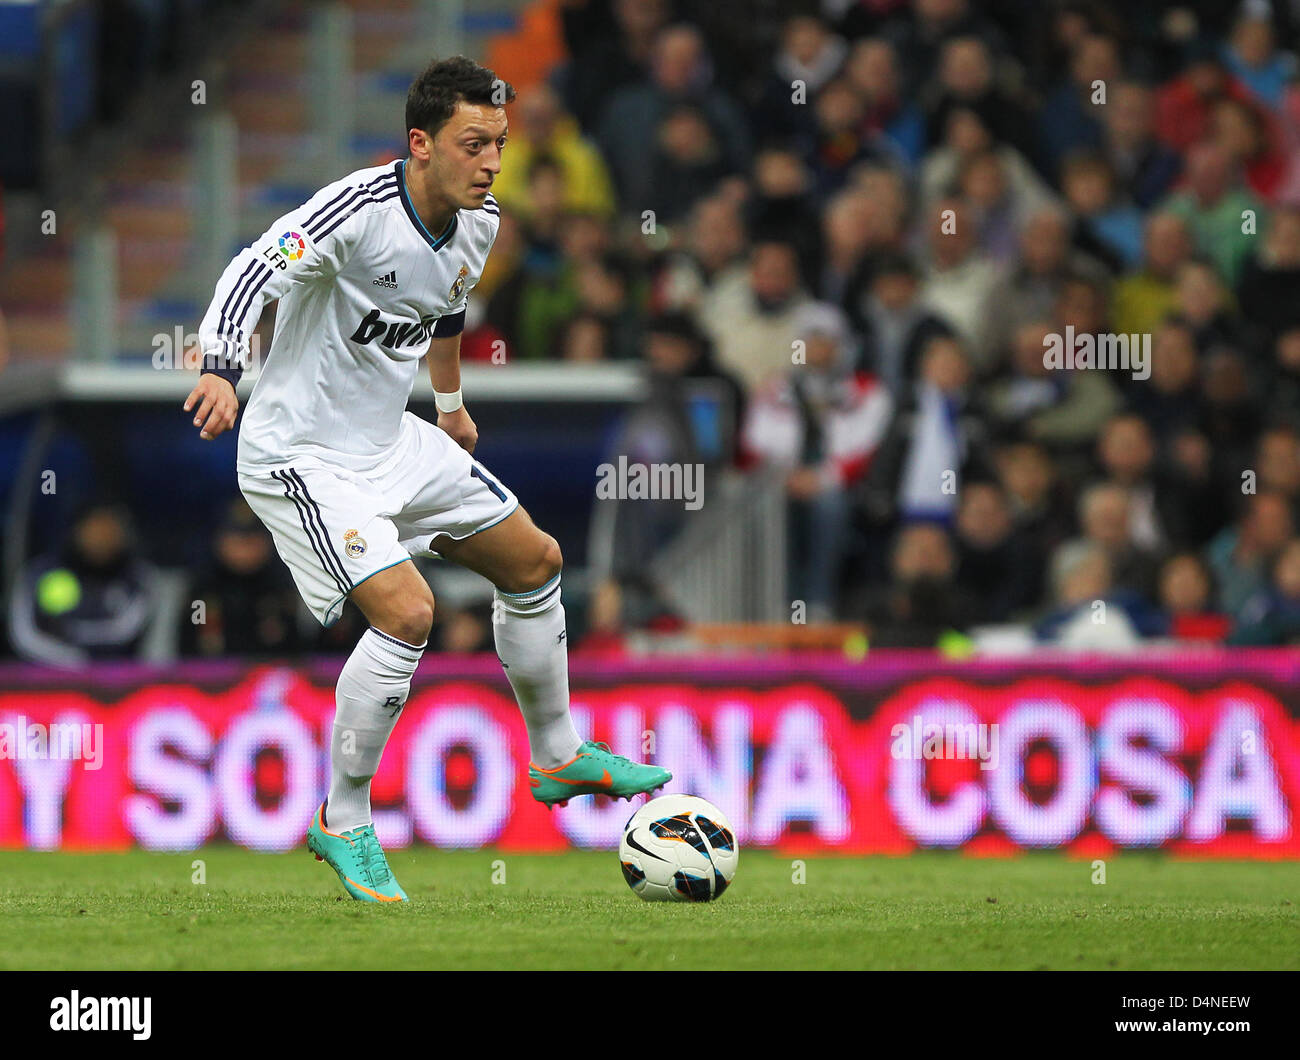 Real Madrid's Mesut Özil is seen during the Spanish Primera Division soccer match between Real Madrid and RCD Mallorca at Santiago Bernabeu stadium in Madrid, Spain, 16 March 2013. Madrid won 5:2. Photo: Fabian Stratenschulte/dpa +++(c) dpa - Bildfunk+++/Alamy Live News Stock Photo